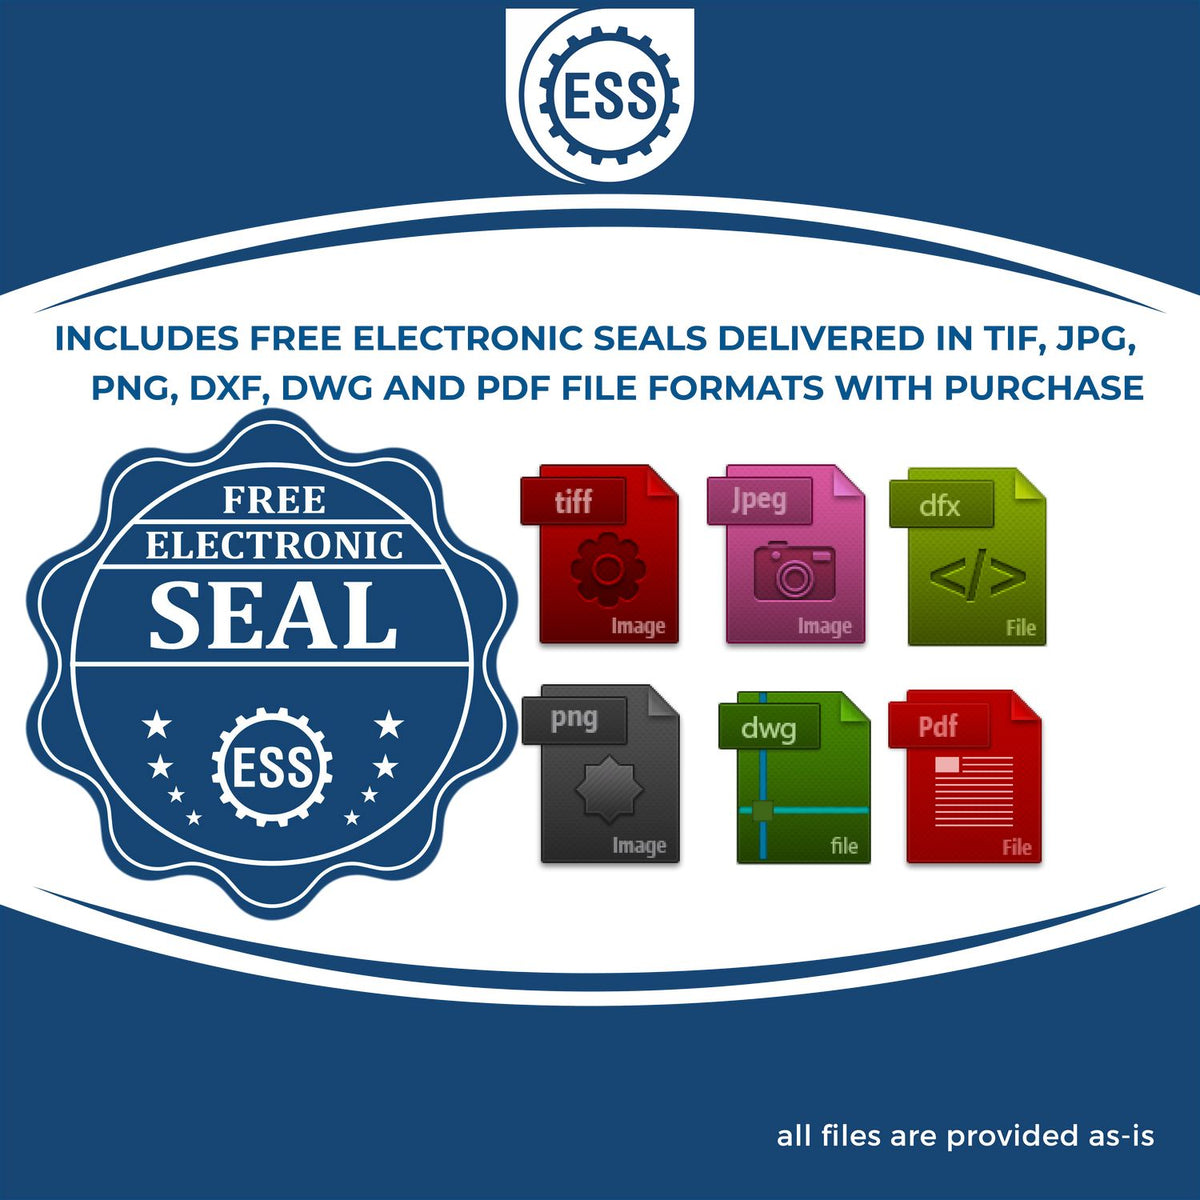 An infographic for the free electronic seal for the Soft Indiana Professional Geologist Seal illustrating the different file type icons such as DXF, DWG, TIF, JPG and PNG.